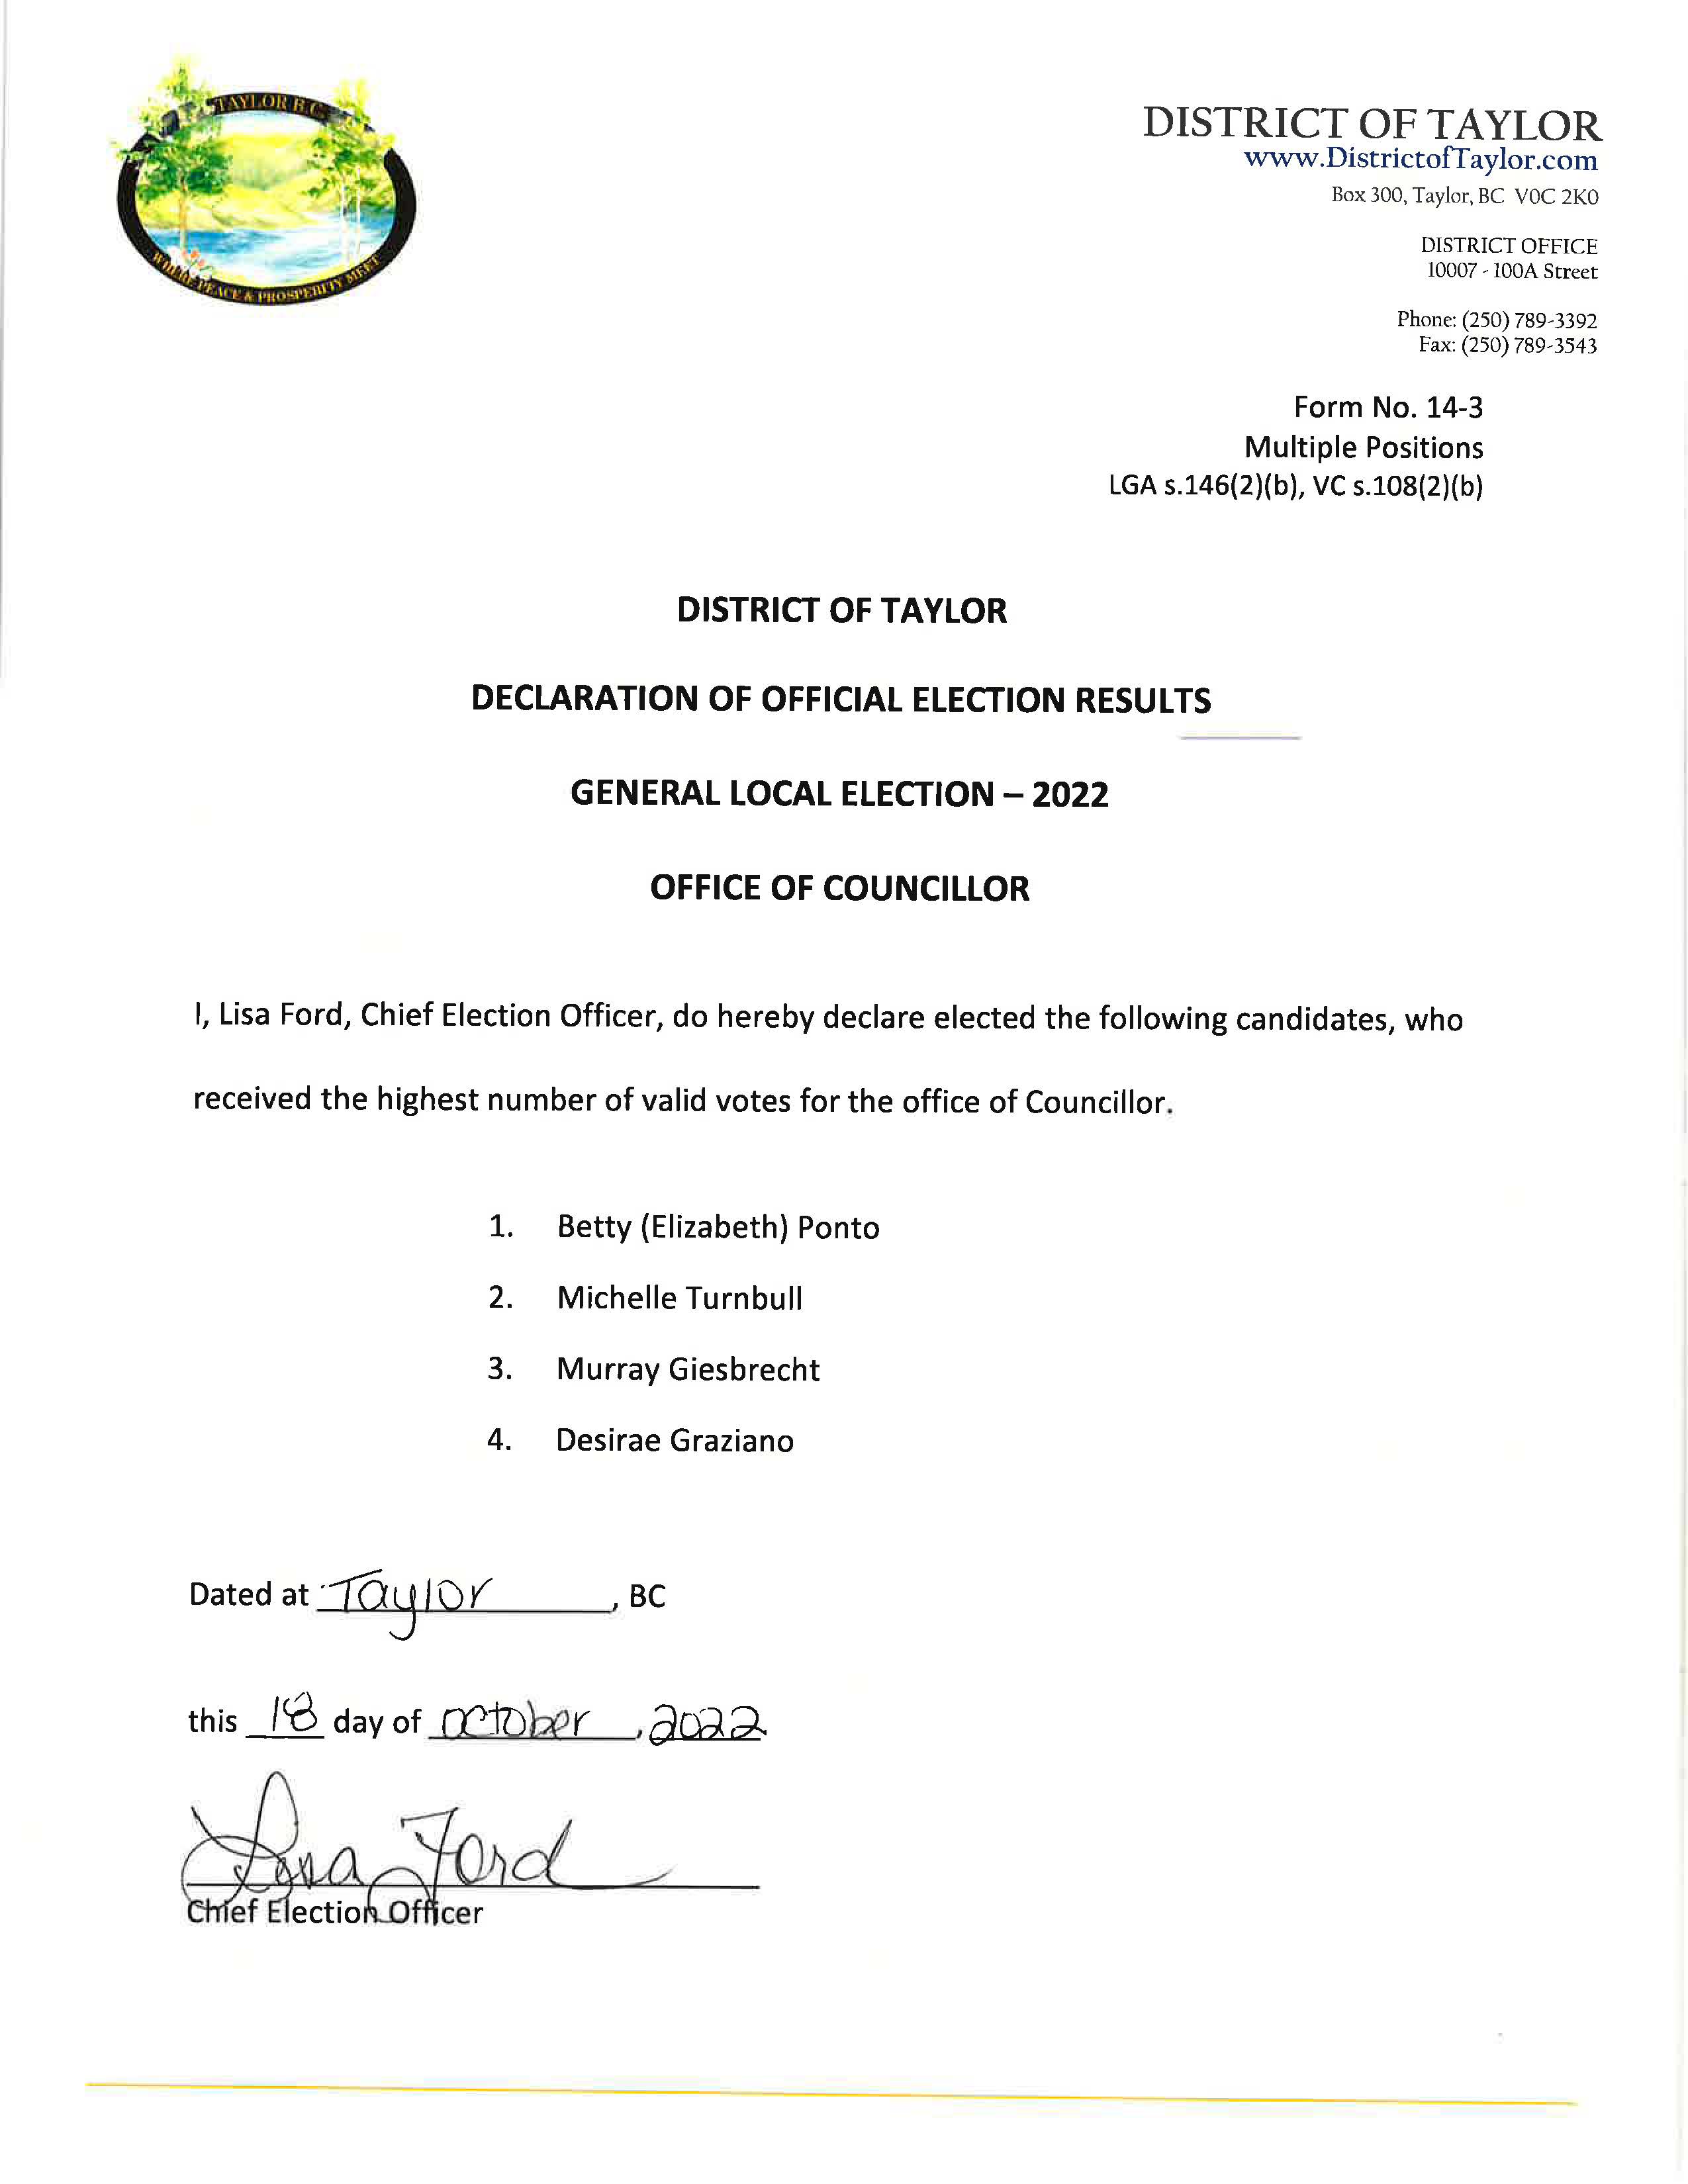 Declaration of Official Election Results for the Office of Councillor